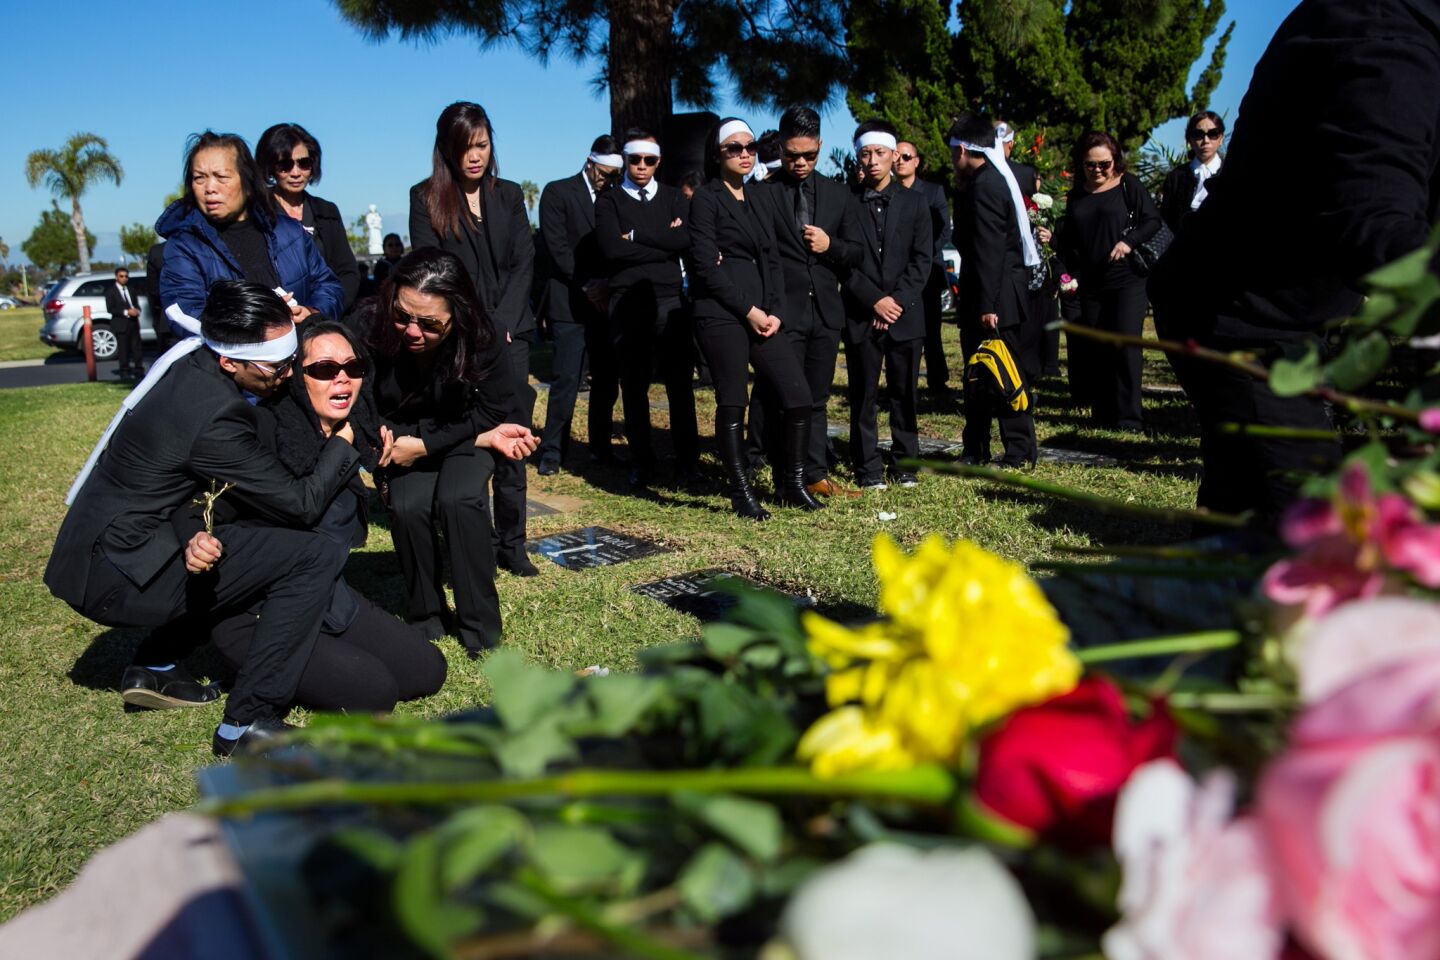 Van Thanh Nguyen shouts her daughter's name during her funeral at the Good Shepherd Cemetary in Huntington Beach. Tin Nguyen was 31.